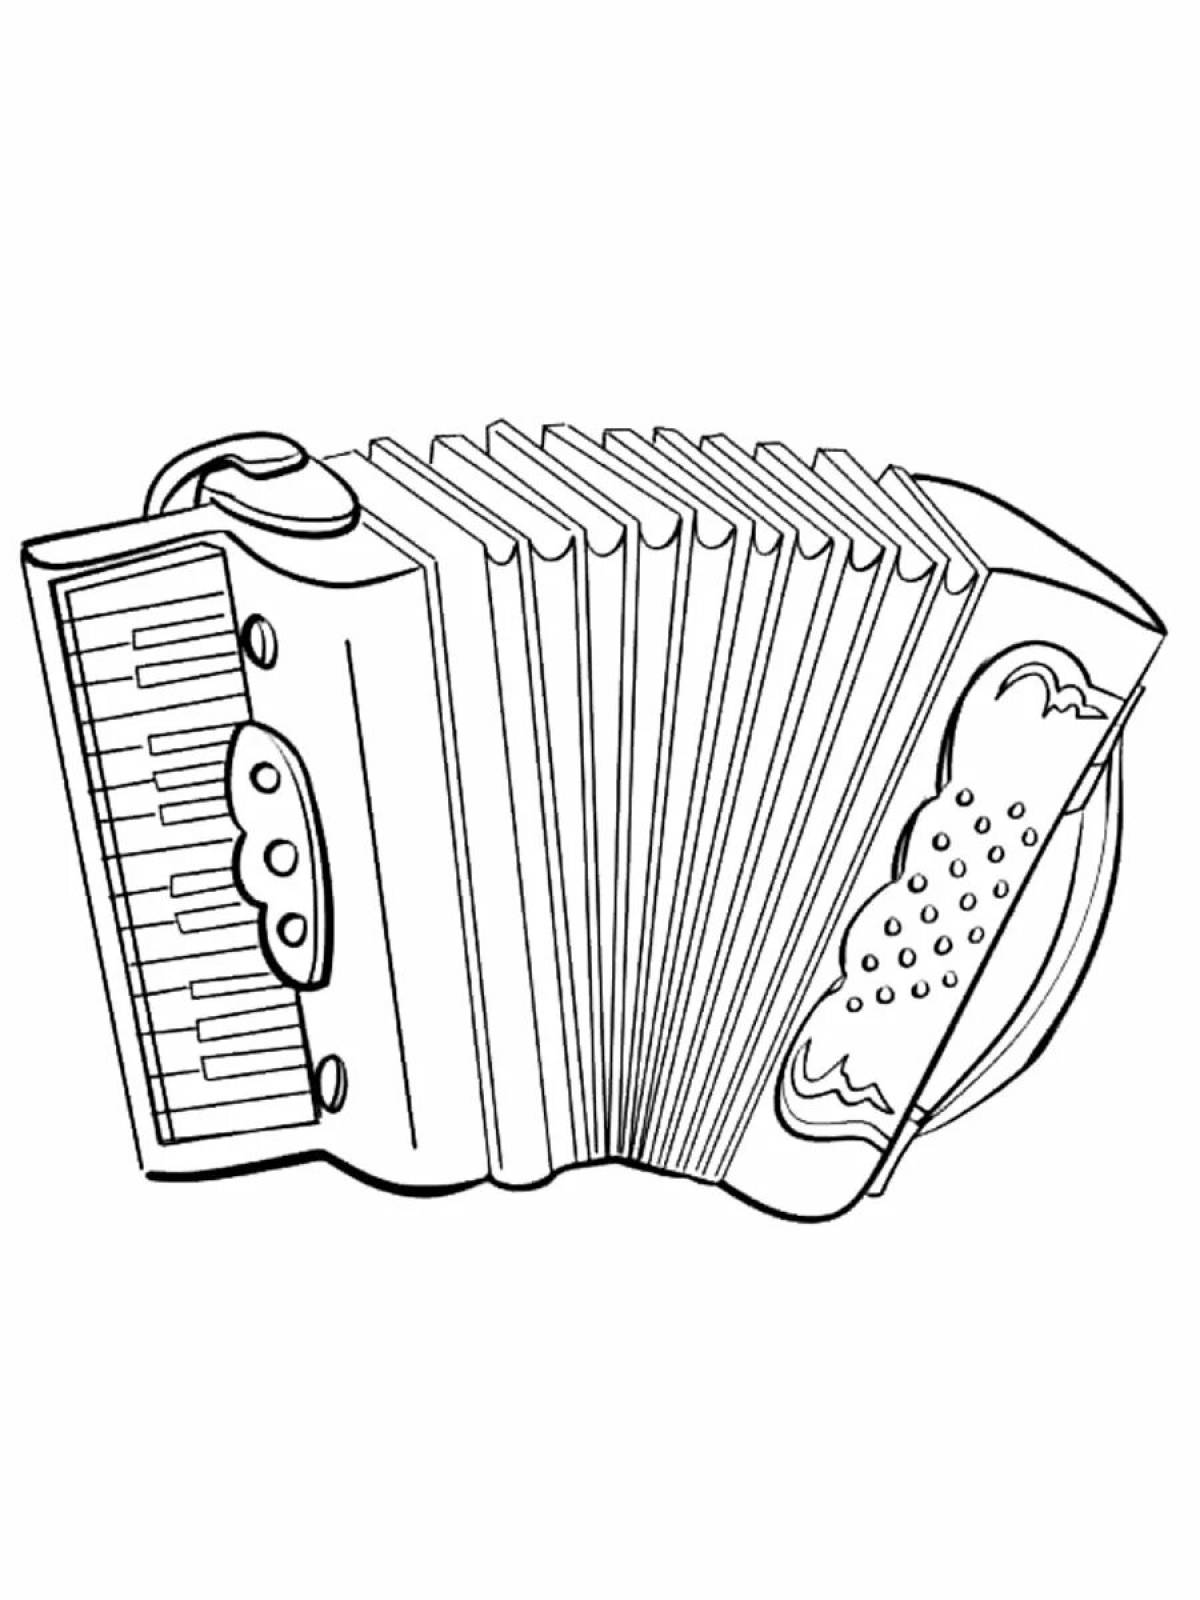 Attractive accordion coloring page for juniors